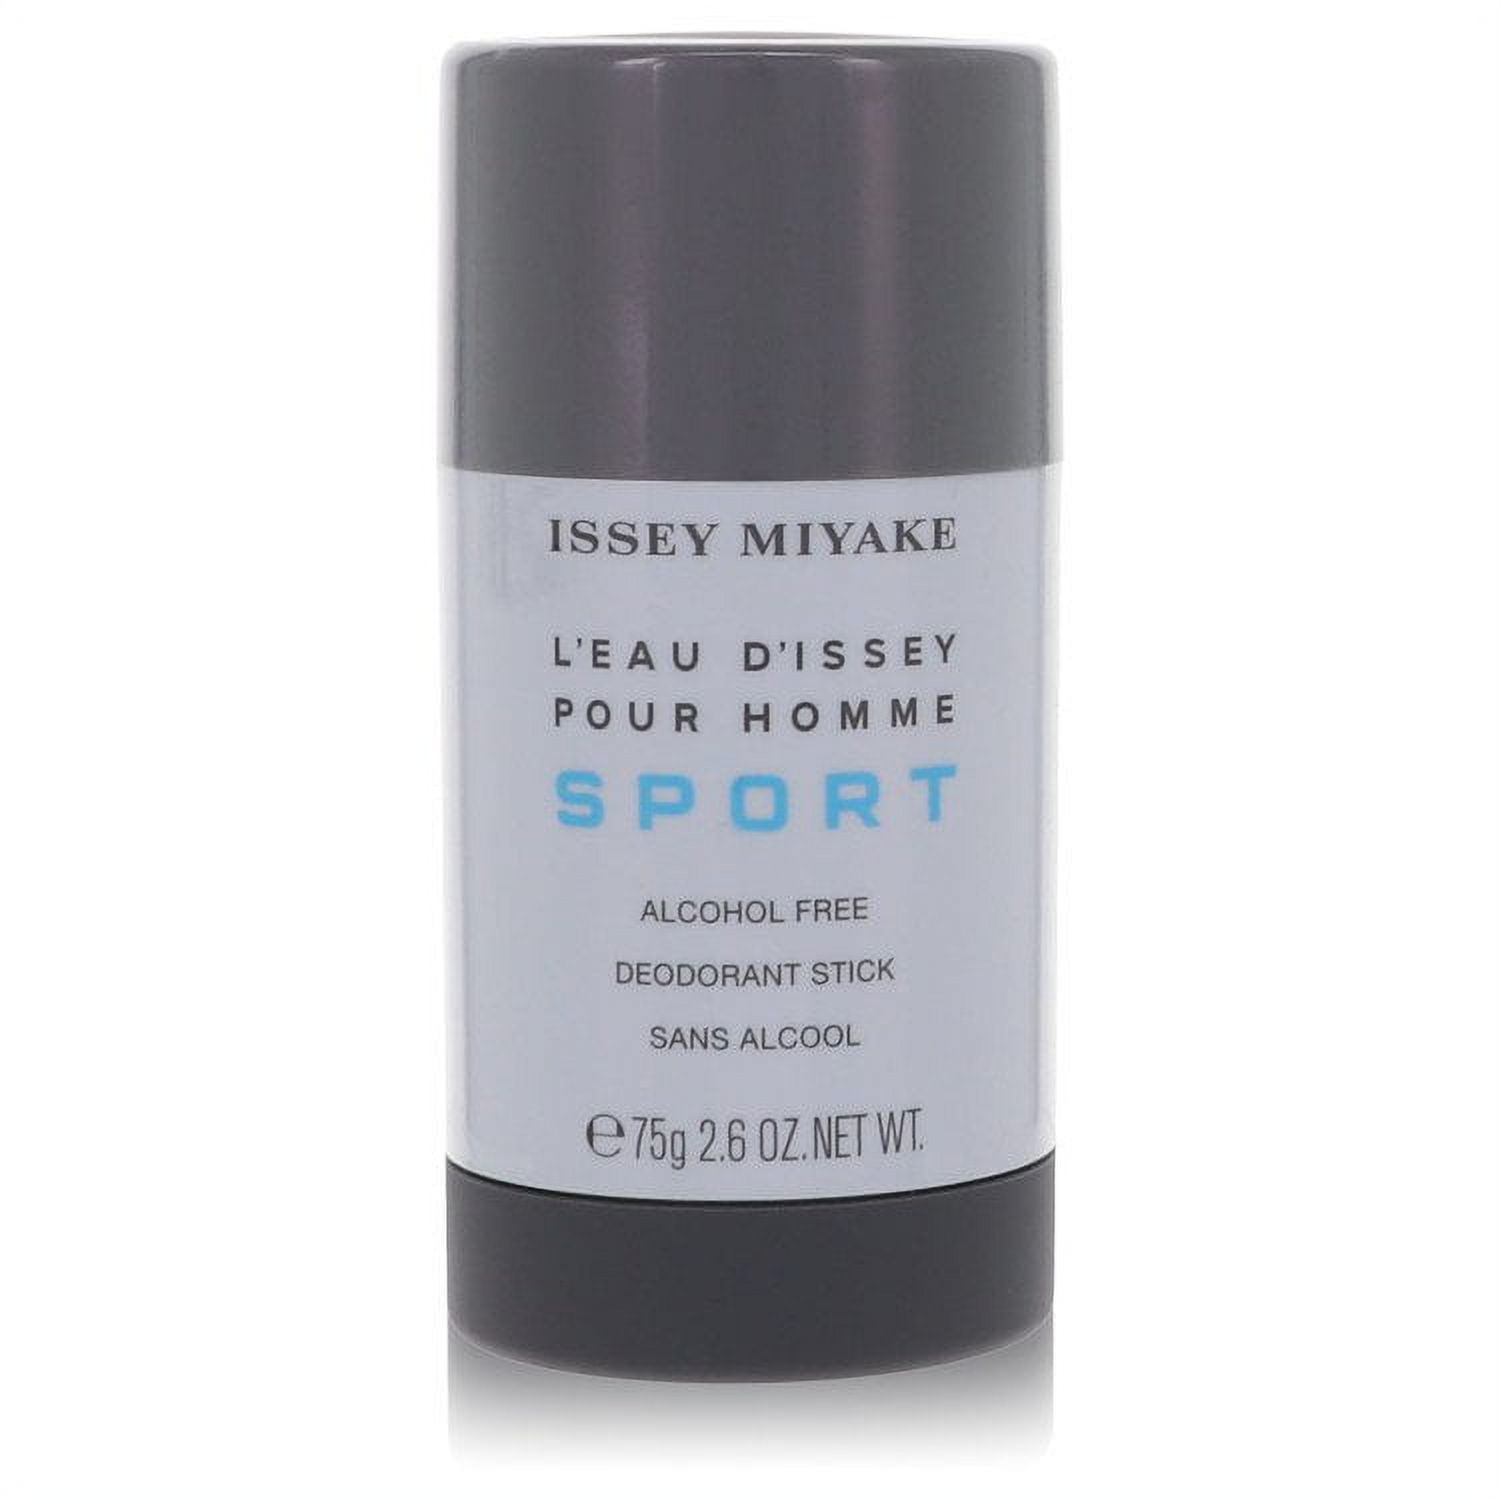 L'eau D'Issey Pour Homme Sport by Issey Miyake - Men - Alcohol Free Deodorant  Stick 2.6 oz 